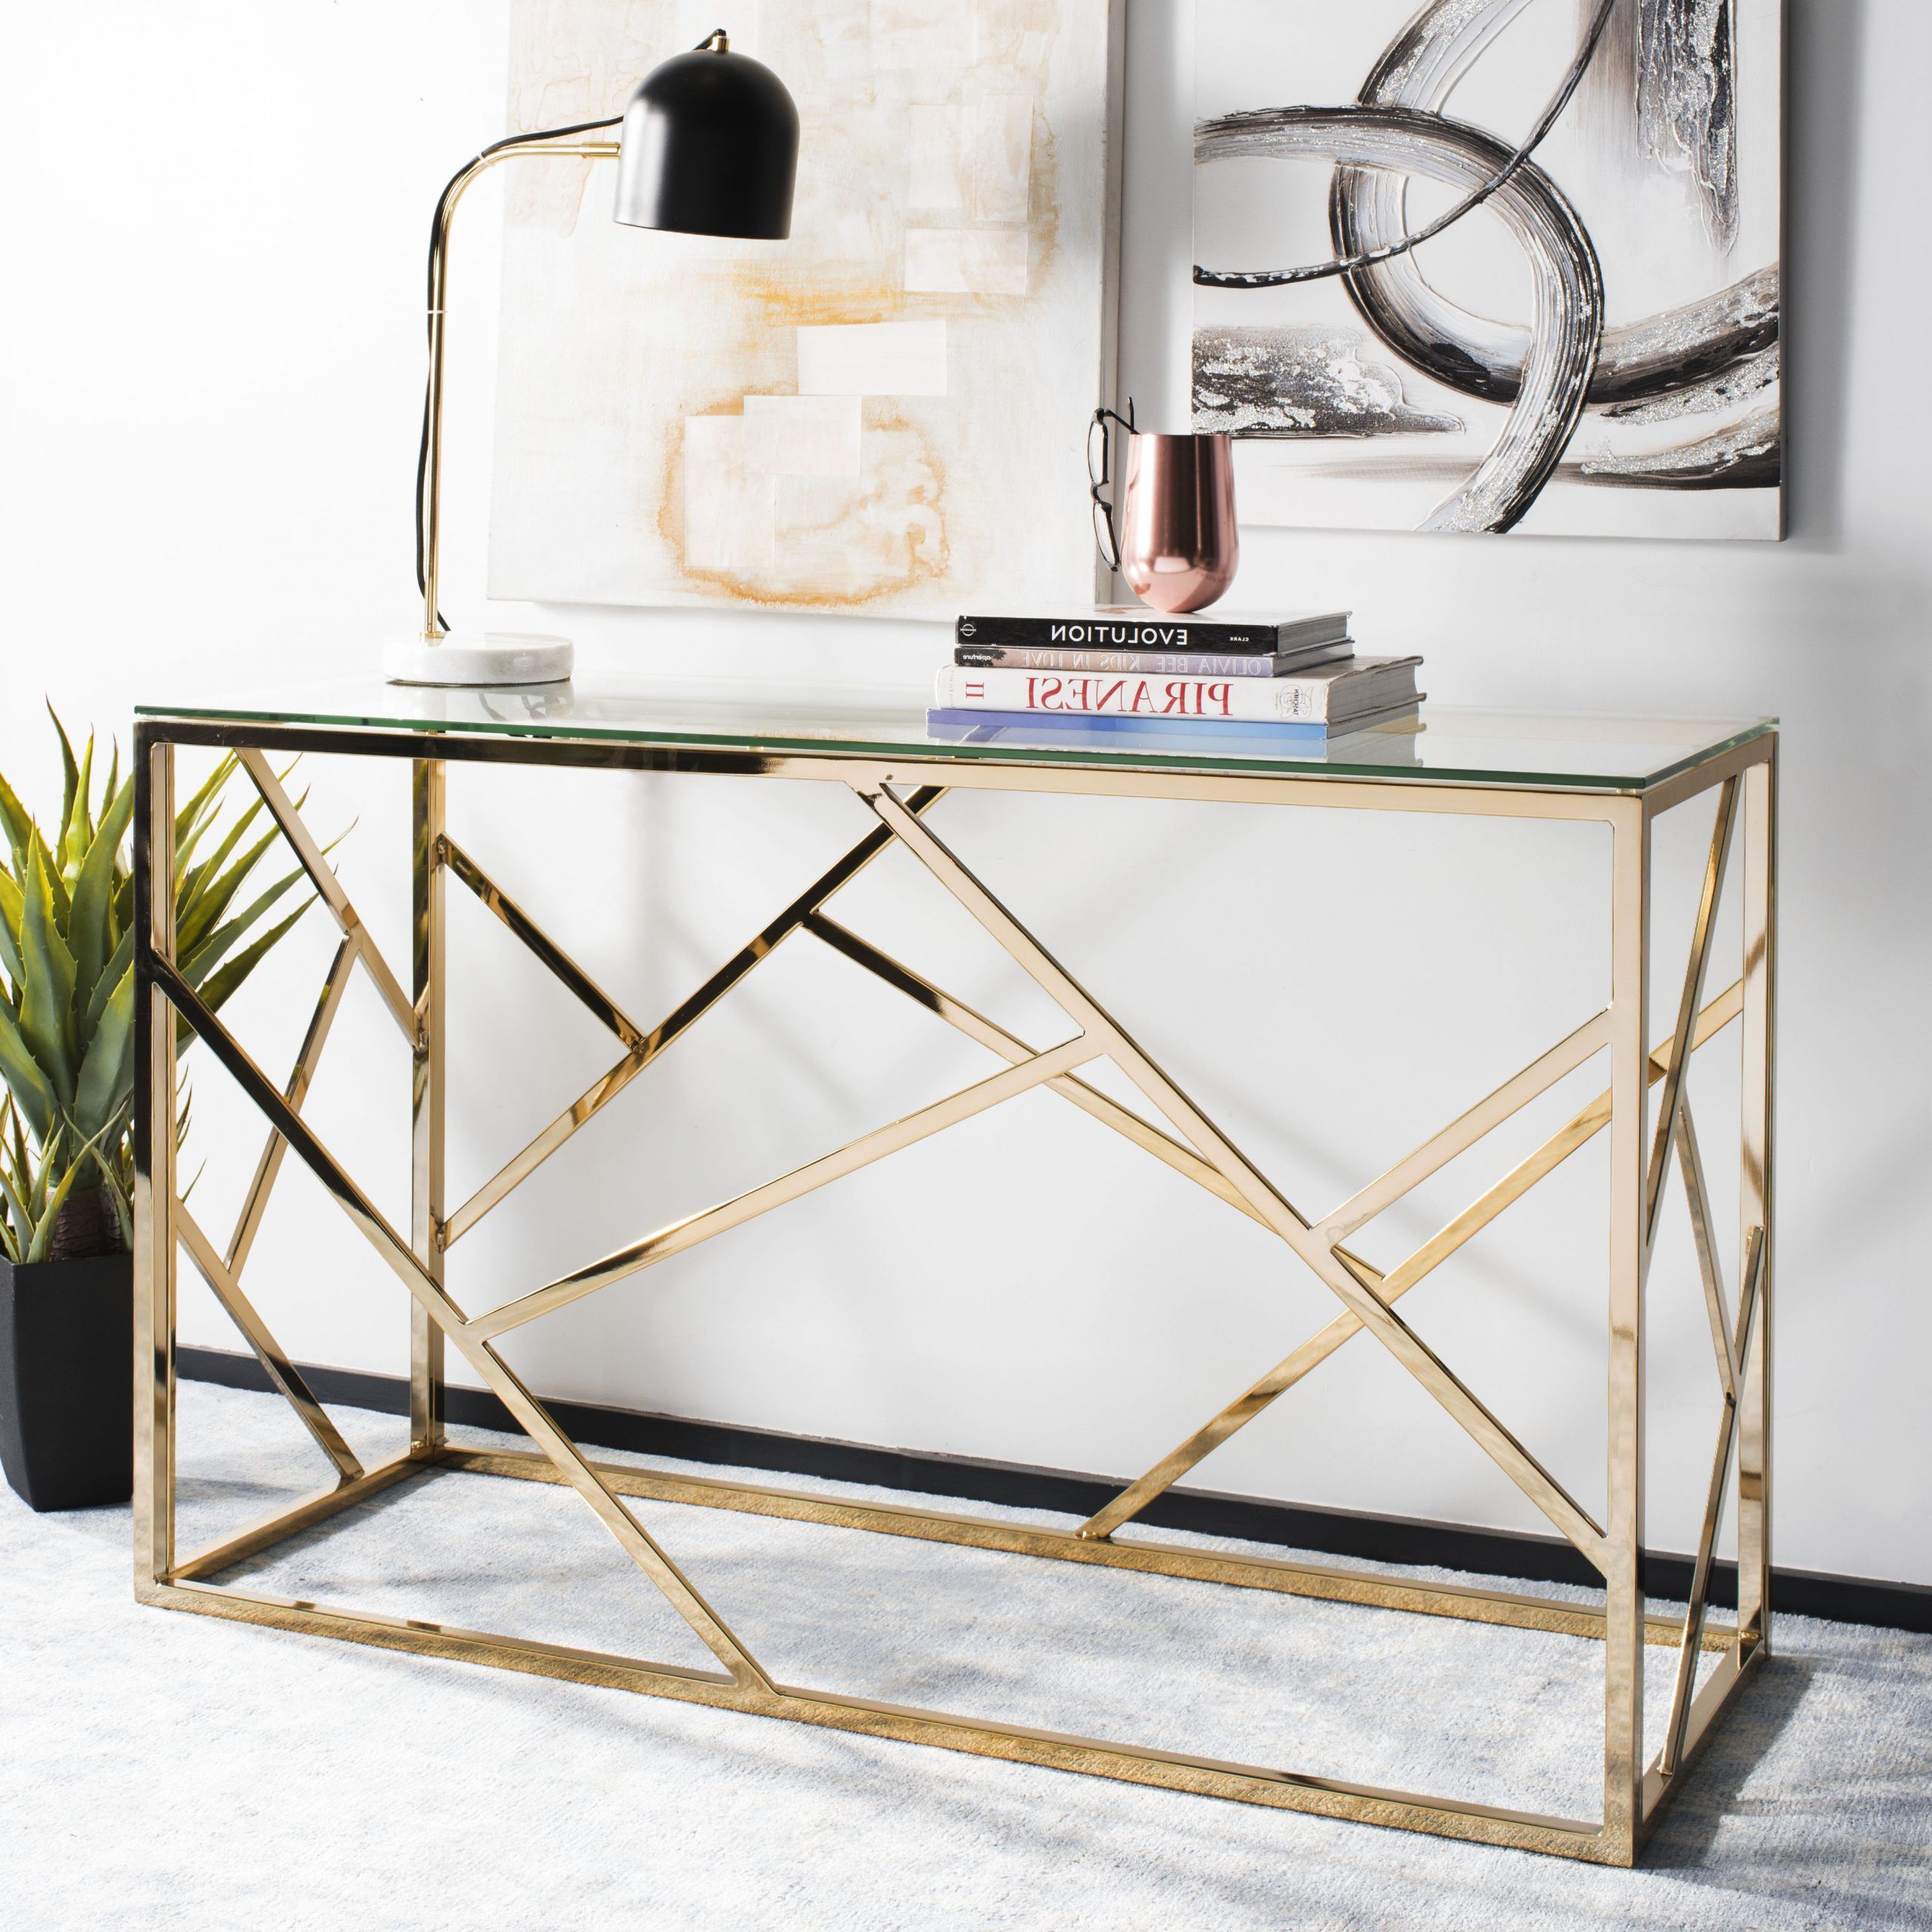 Most Recent Safavieh Namiko Modern Glam Console Table, Brass/glass Top Within Glass Console Tables (View 8 of 10)